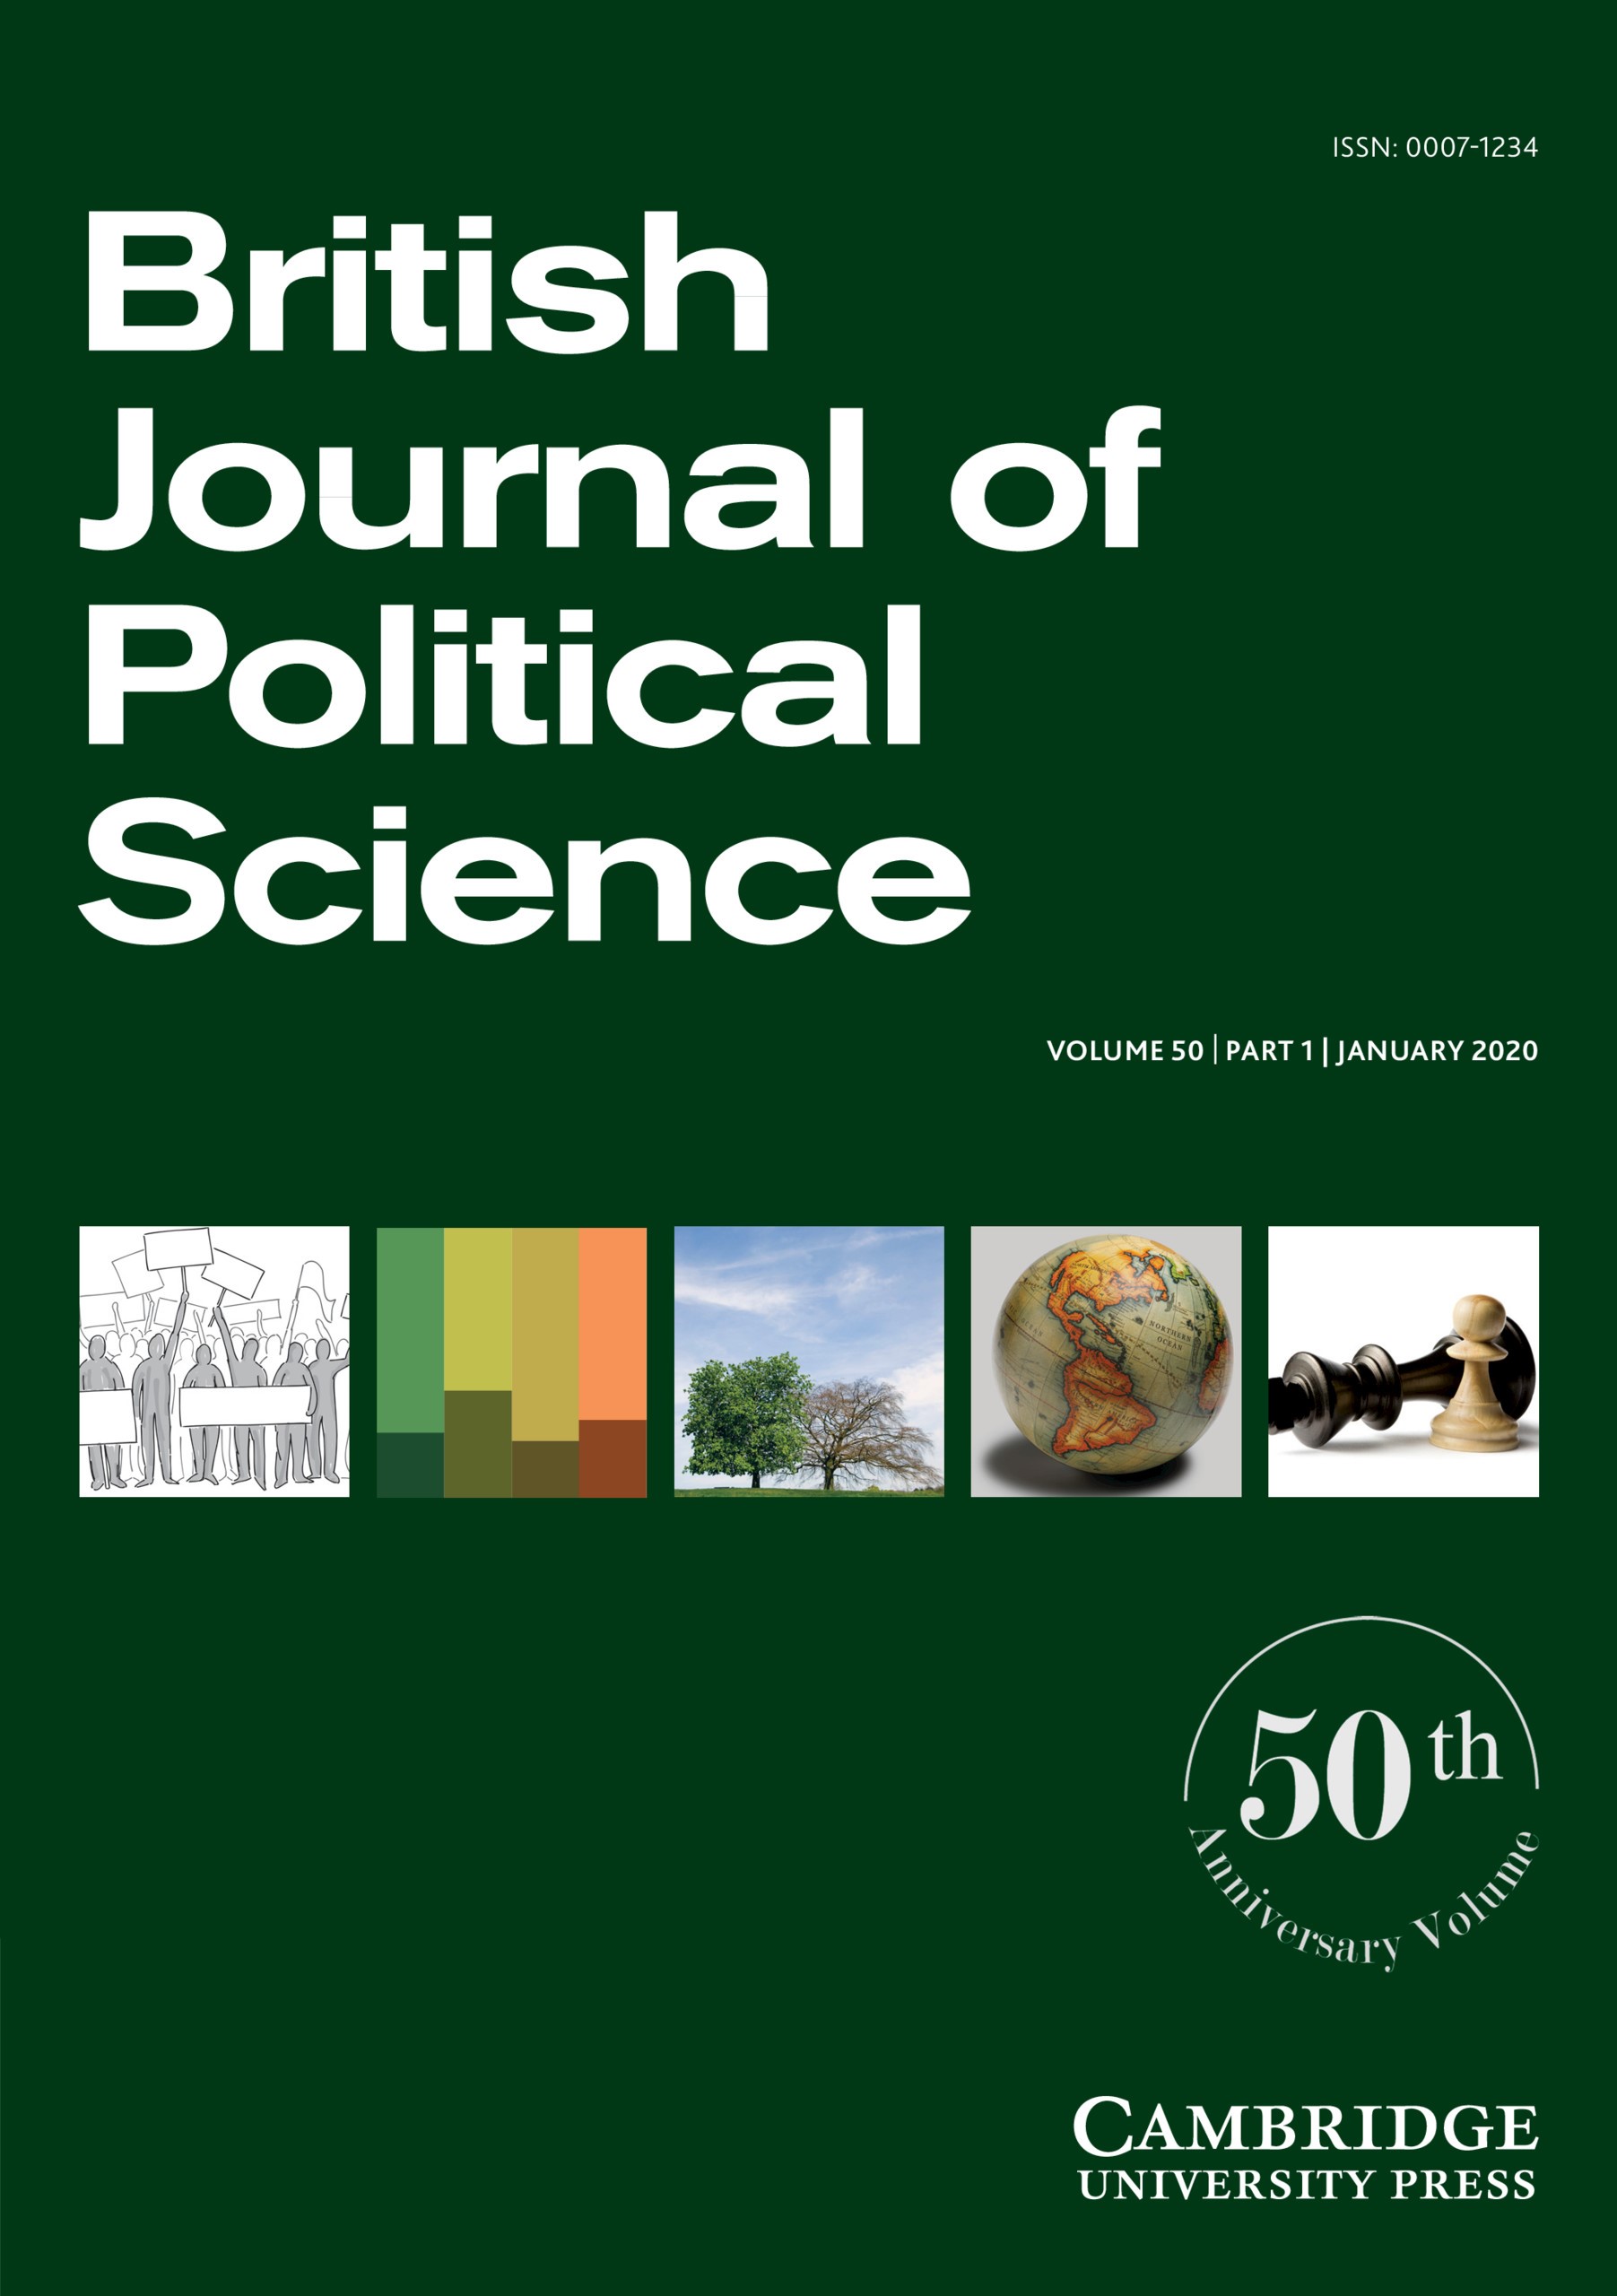 research articles on political science